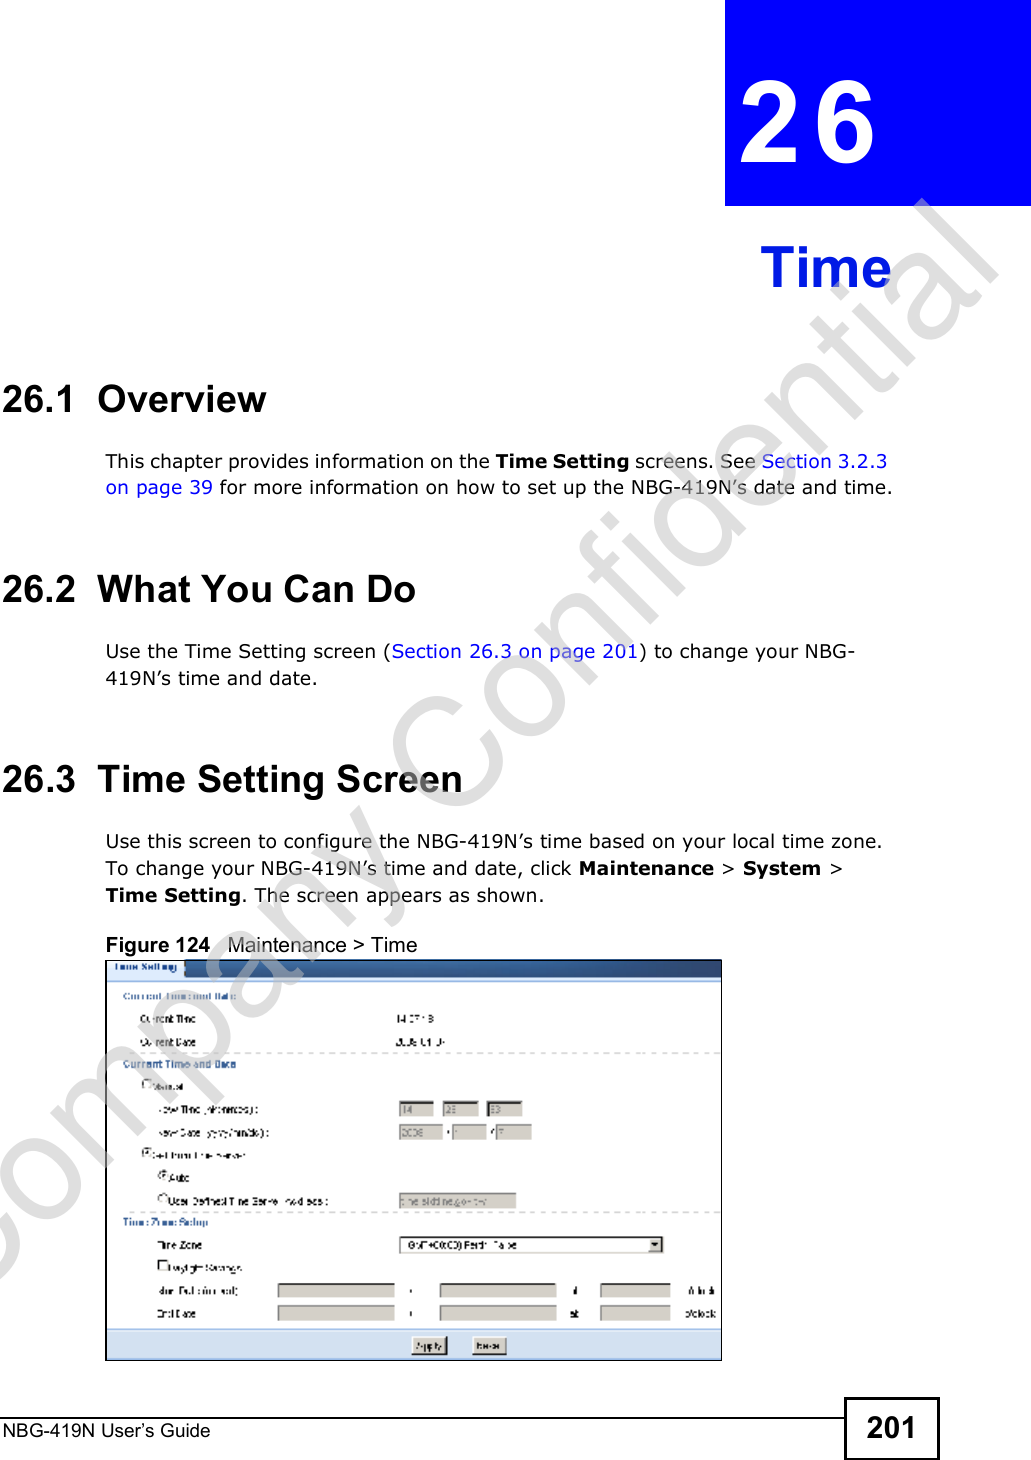 NBG-419N User s Guide 201CHAPTER  26 Time26.1  OverviewThis chapter provides information on the Time Setting screens. See Section 3.2.3 on page 39 for more information on how to set up the NBG-419N!s date and time.26.2  What You Can DoUse the Time Setting screen (Section 26.3 on page 201) to change your NBG-419N!s time and date.26.3  Time Setting ScreenUse this screen to configure the NBG-419N!s time based on your local time zone. To change your NBG-419N!s time and date, click Maintenance &gt; System &gt; Time Setting. The screen appears as shown. Figure 124   Maintenance &gt; Time Company Confidential